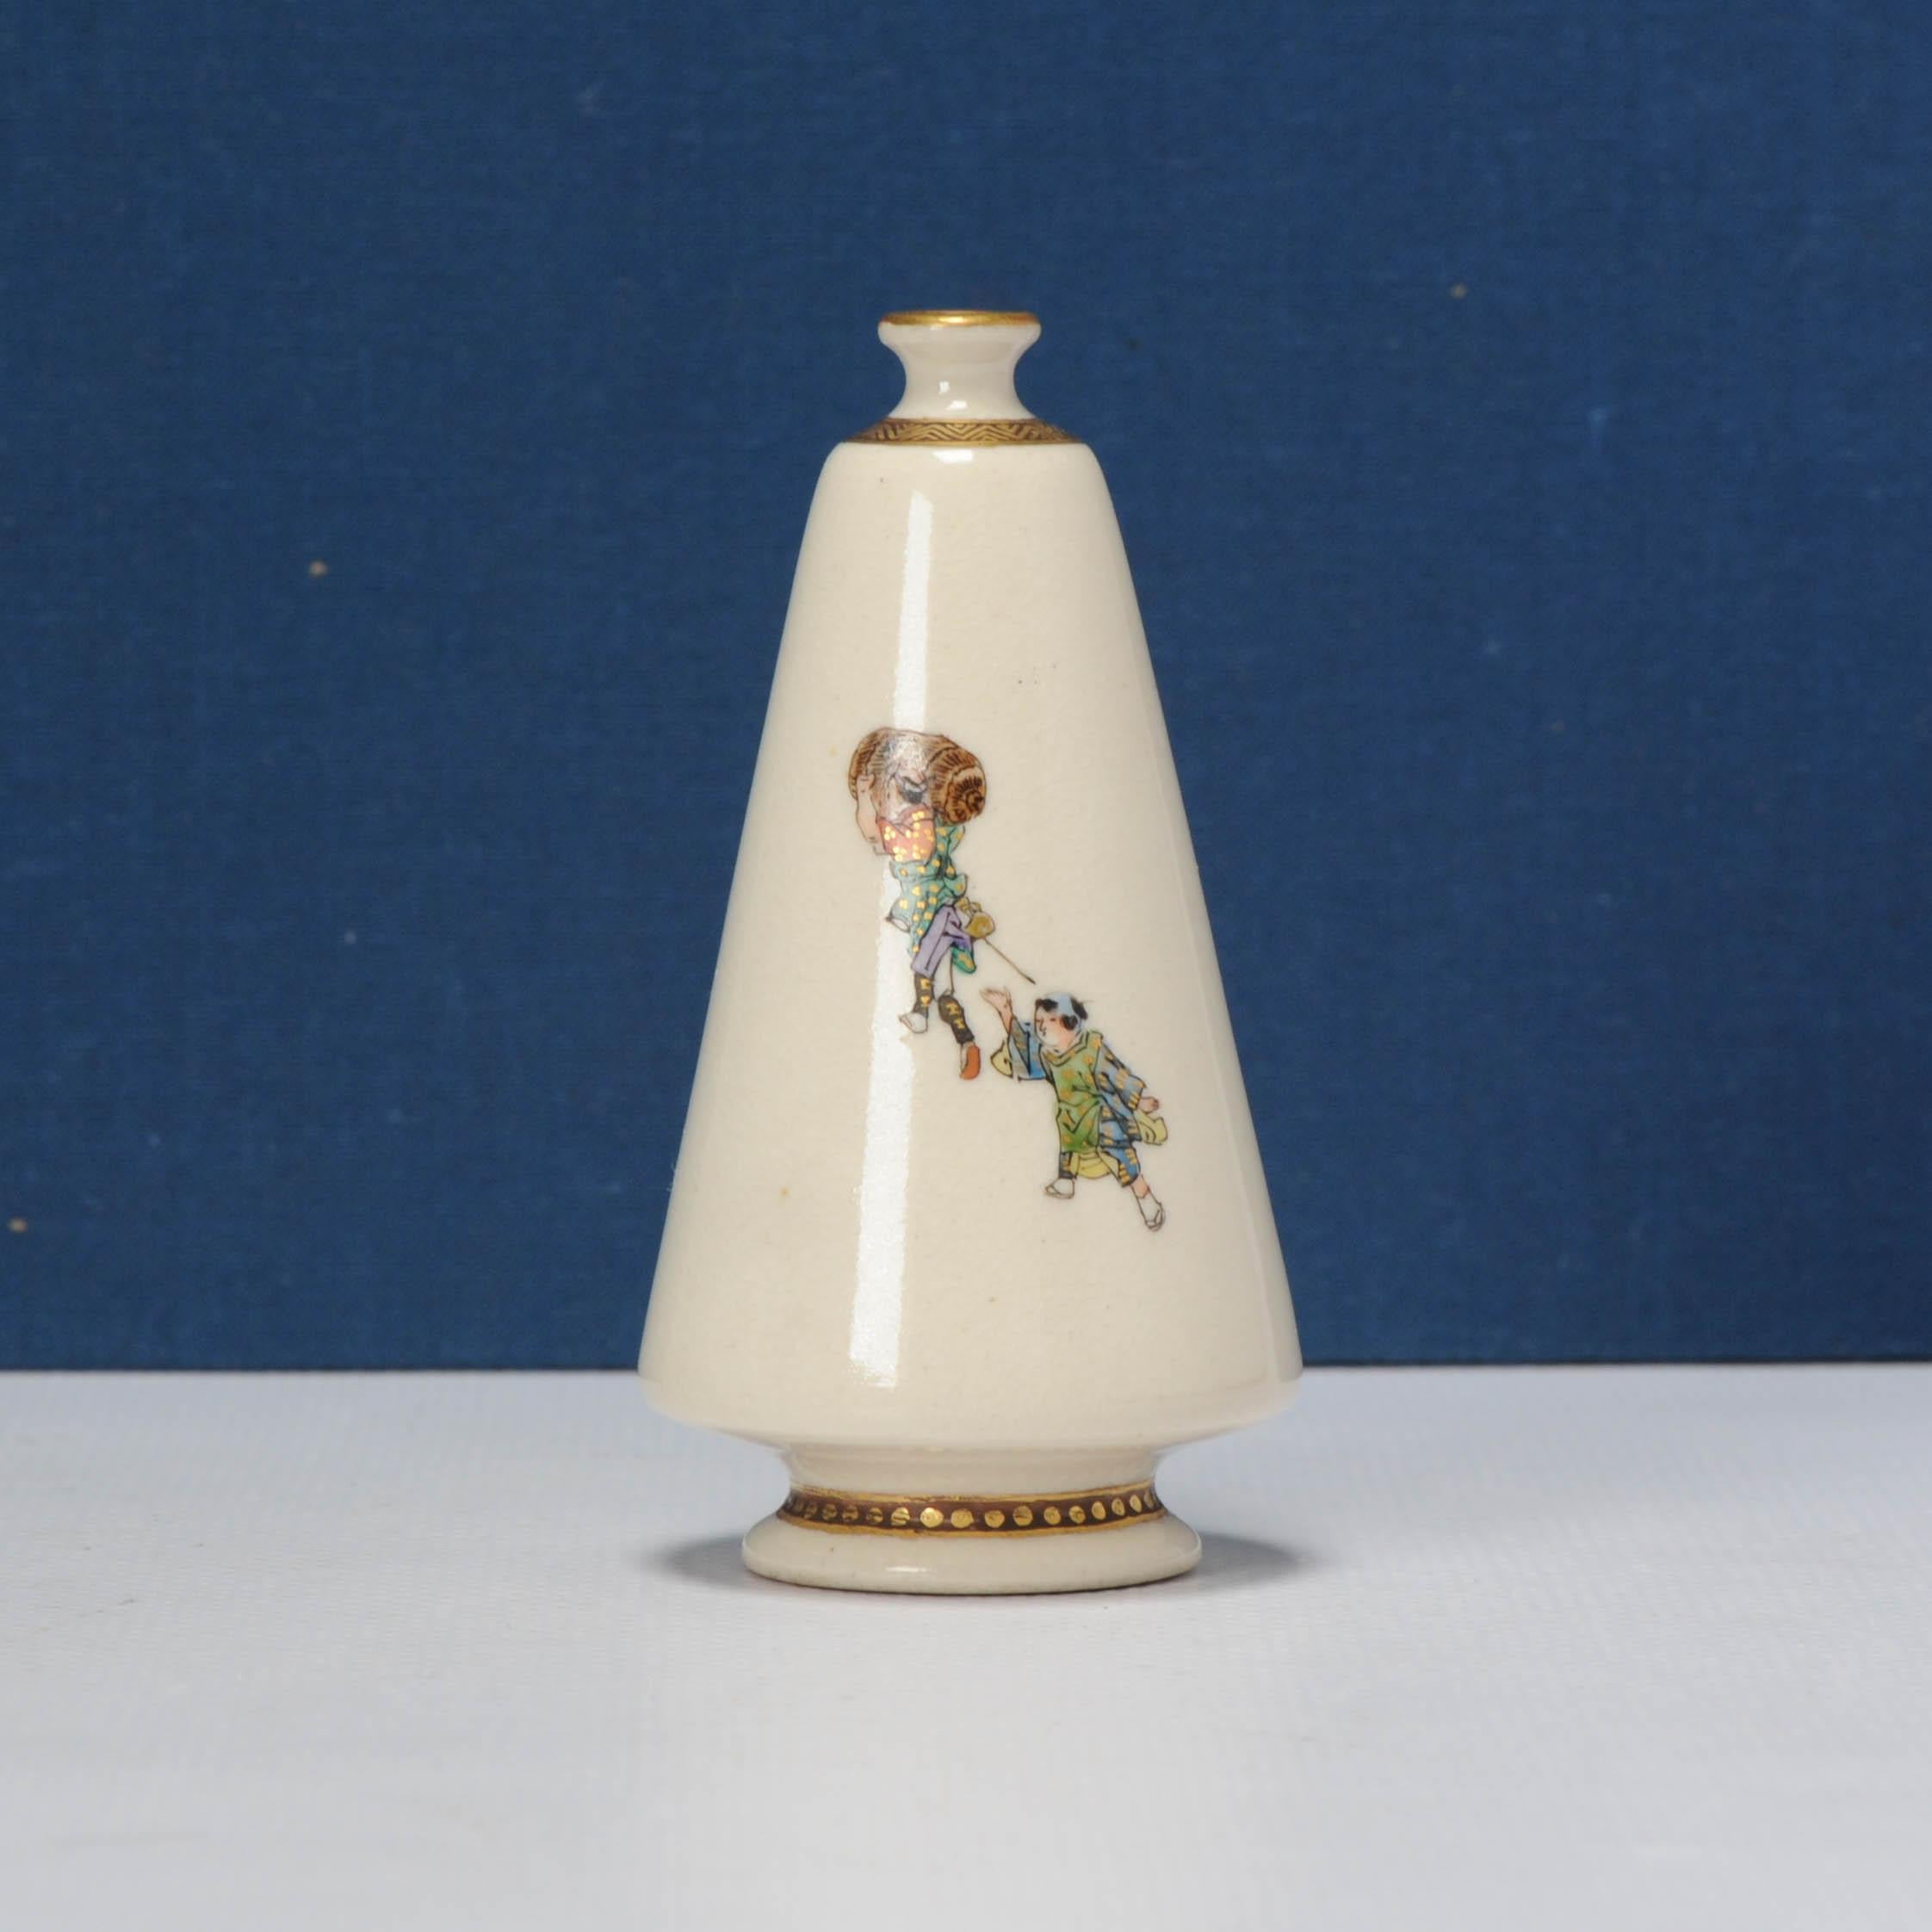 Meiji era (1868-1912), late 19th/early 20th century. Decorated in enamels and gilt, comprising a conical vase depicting a two men carrying rice bales, a third man giving chestnuts to a child, another child balancing a tea set on his head, signed in